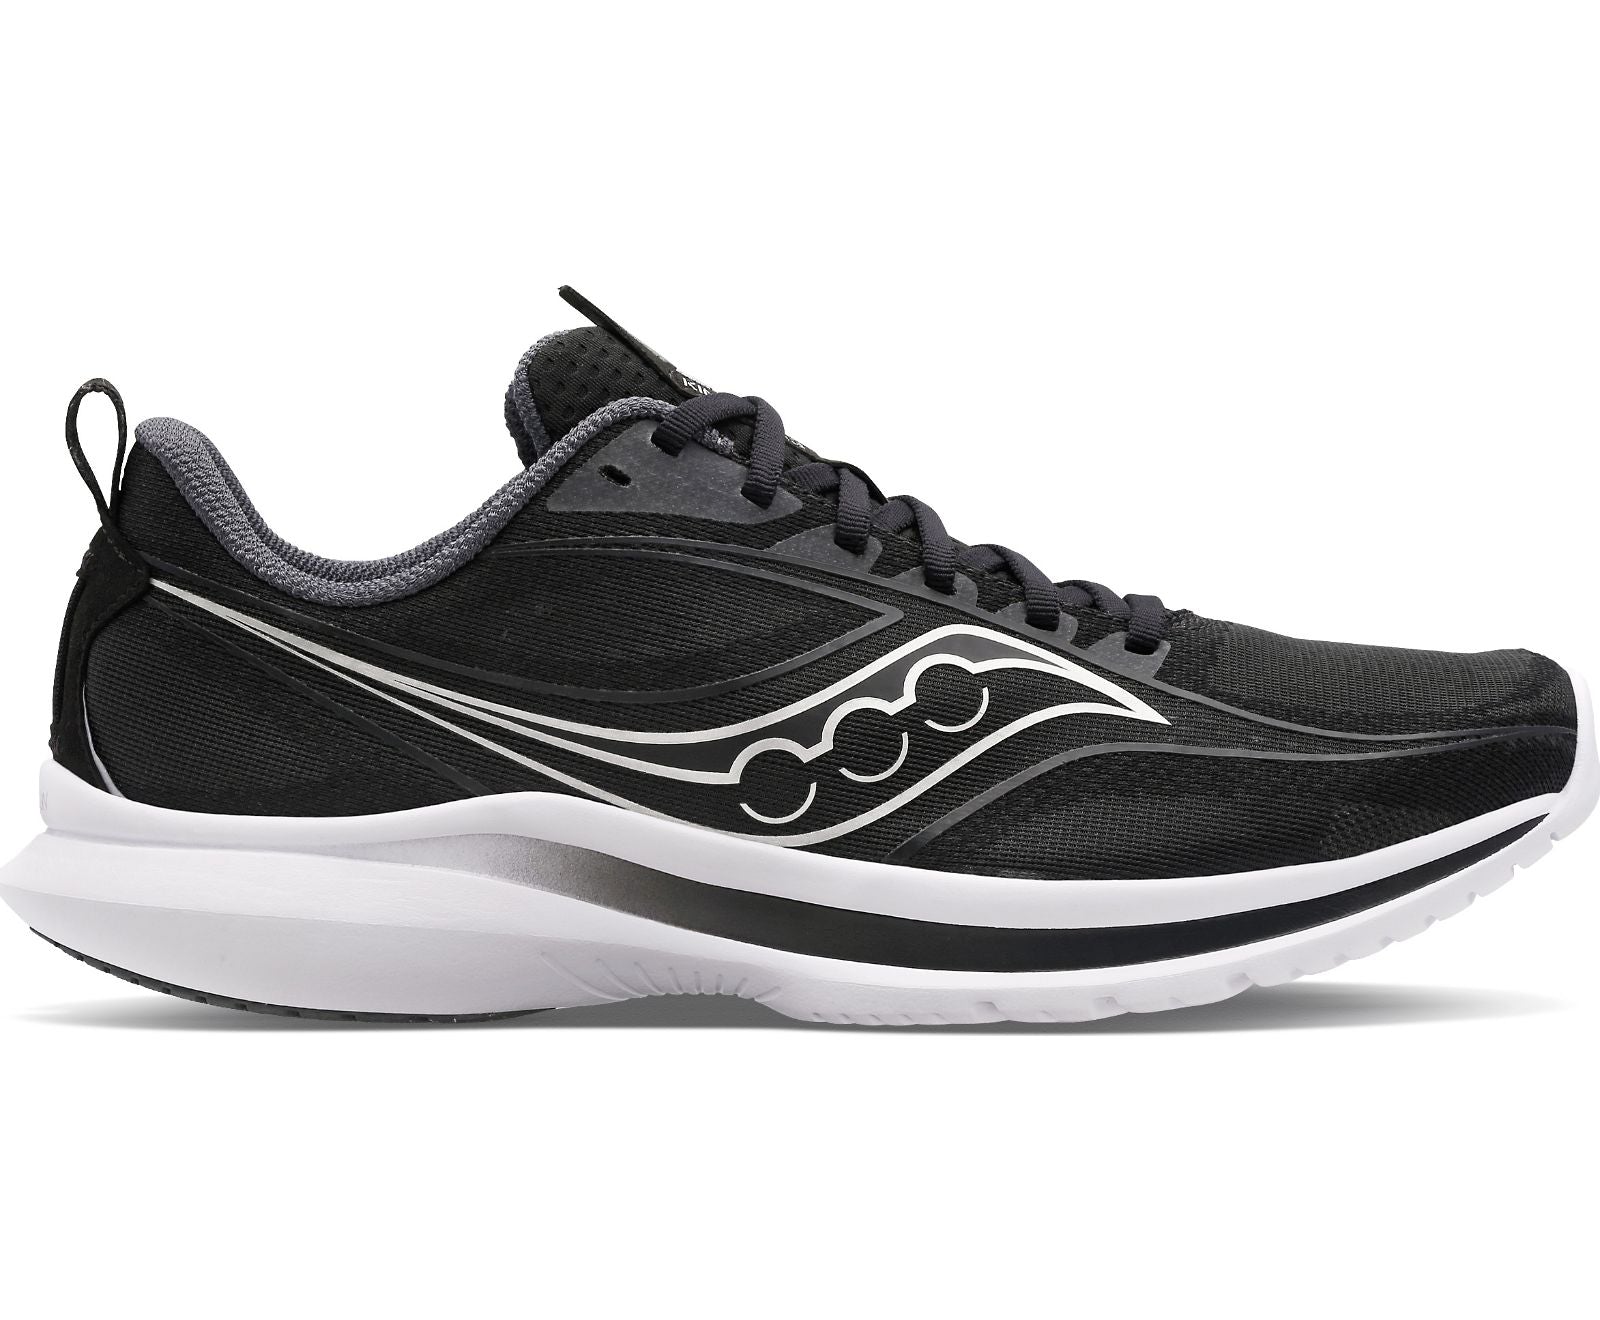 Lateral view of the Men's Kinvara 13 by Saucony in Black/Silver